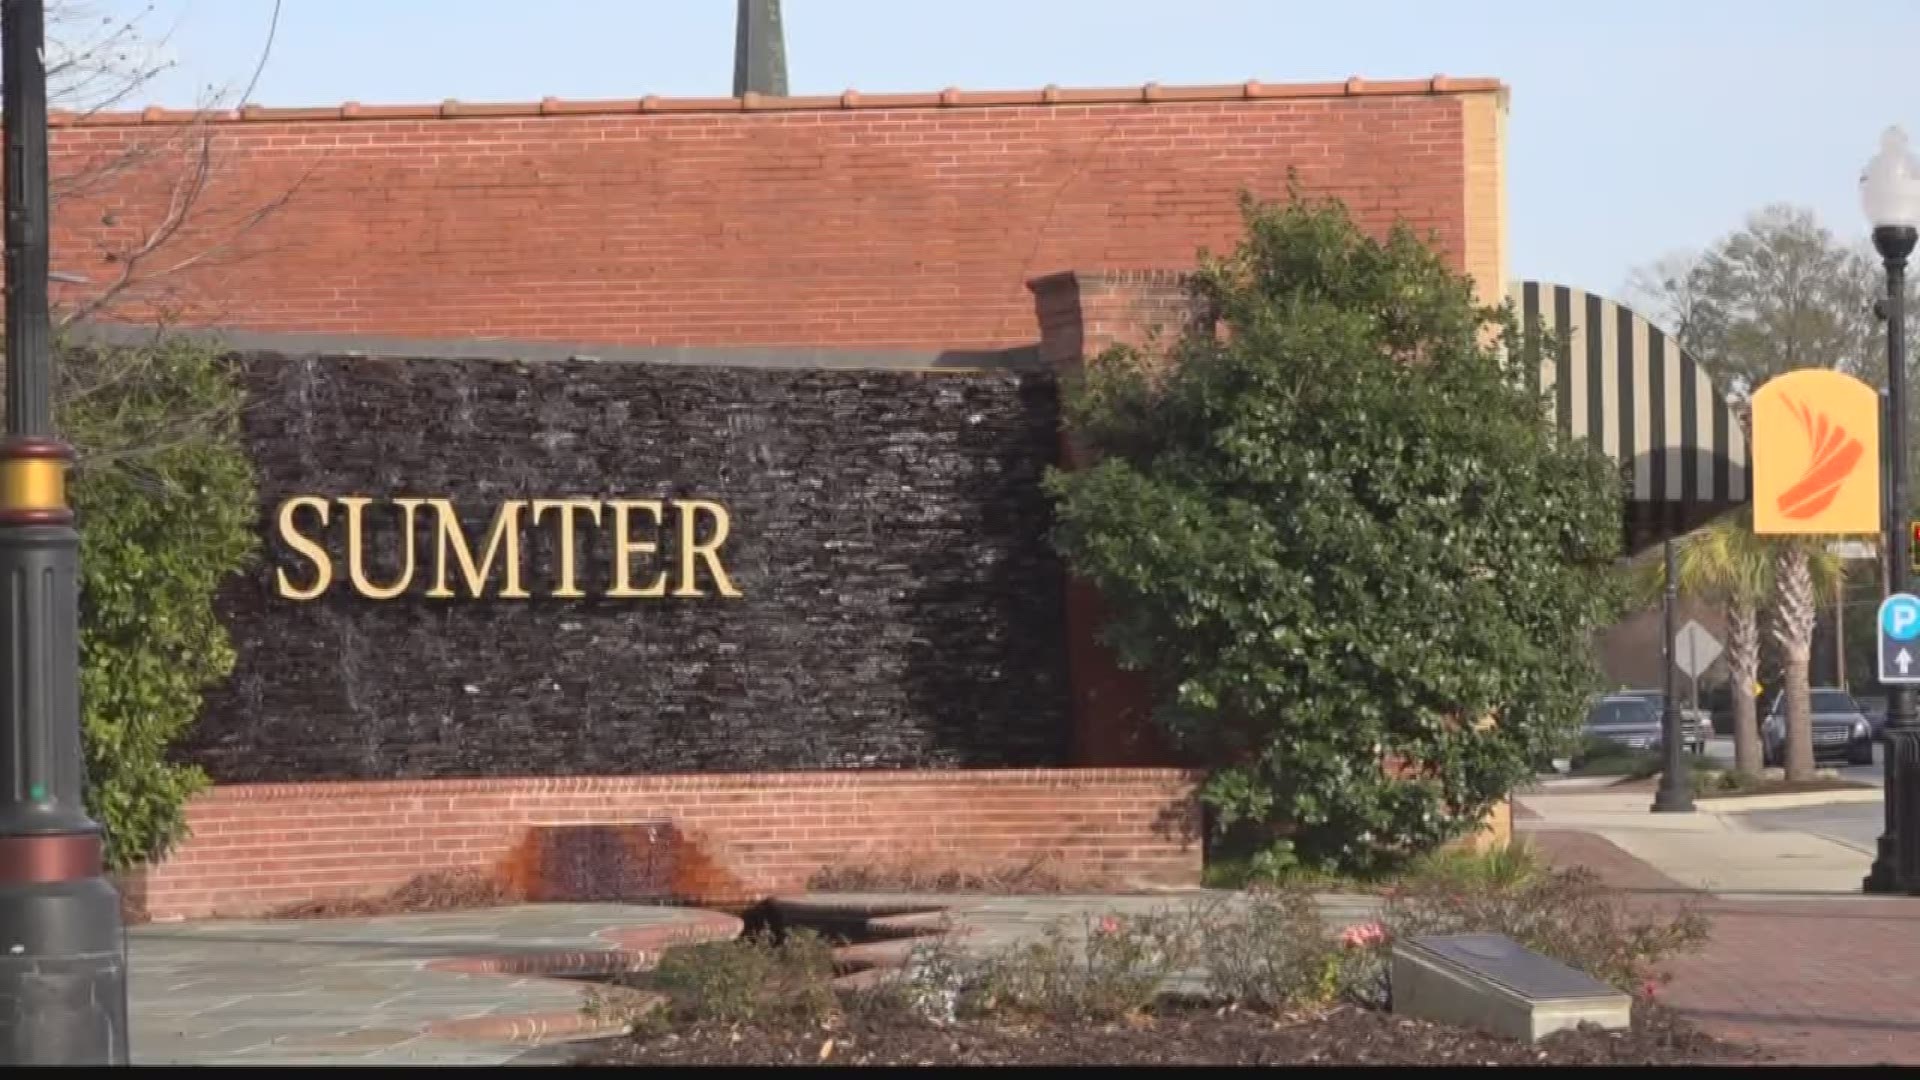 Residents in Sumter say they love seeing their city grown, and want to know what's next.